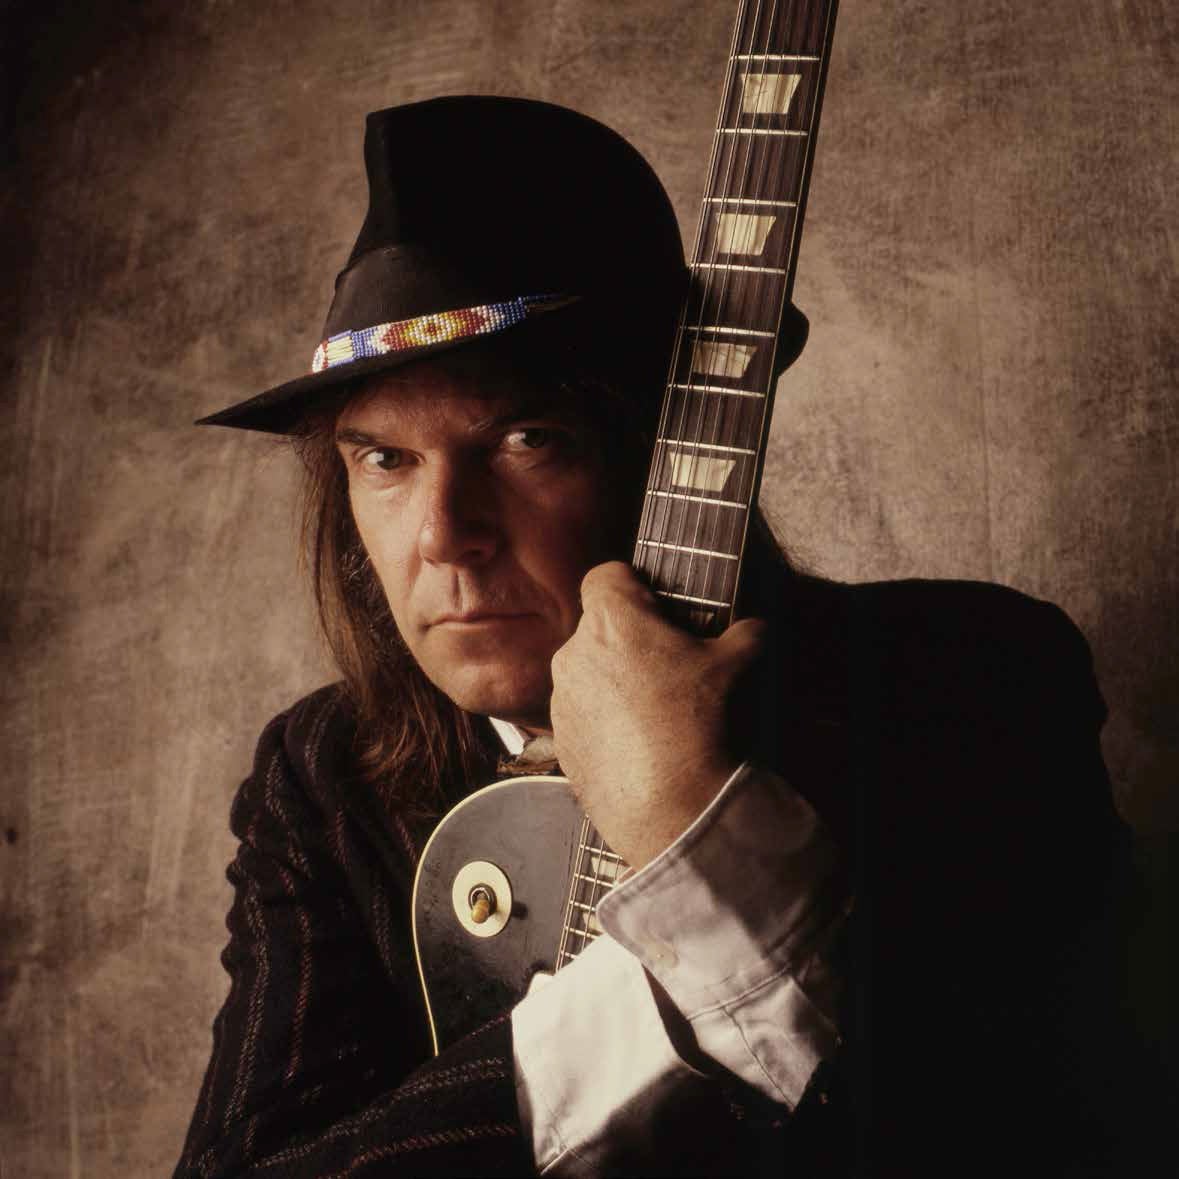 William Coupon Color Photograph - Neil Young, Musician/Songwriter